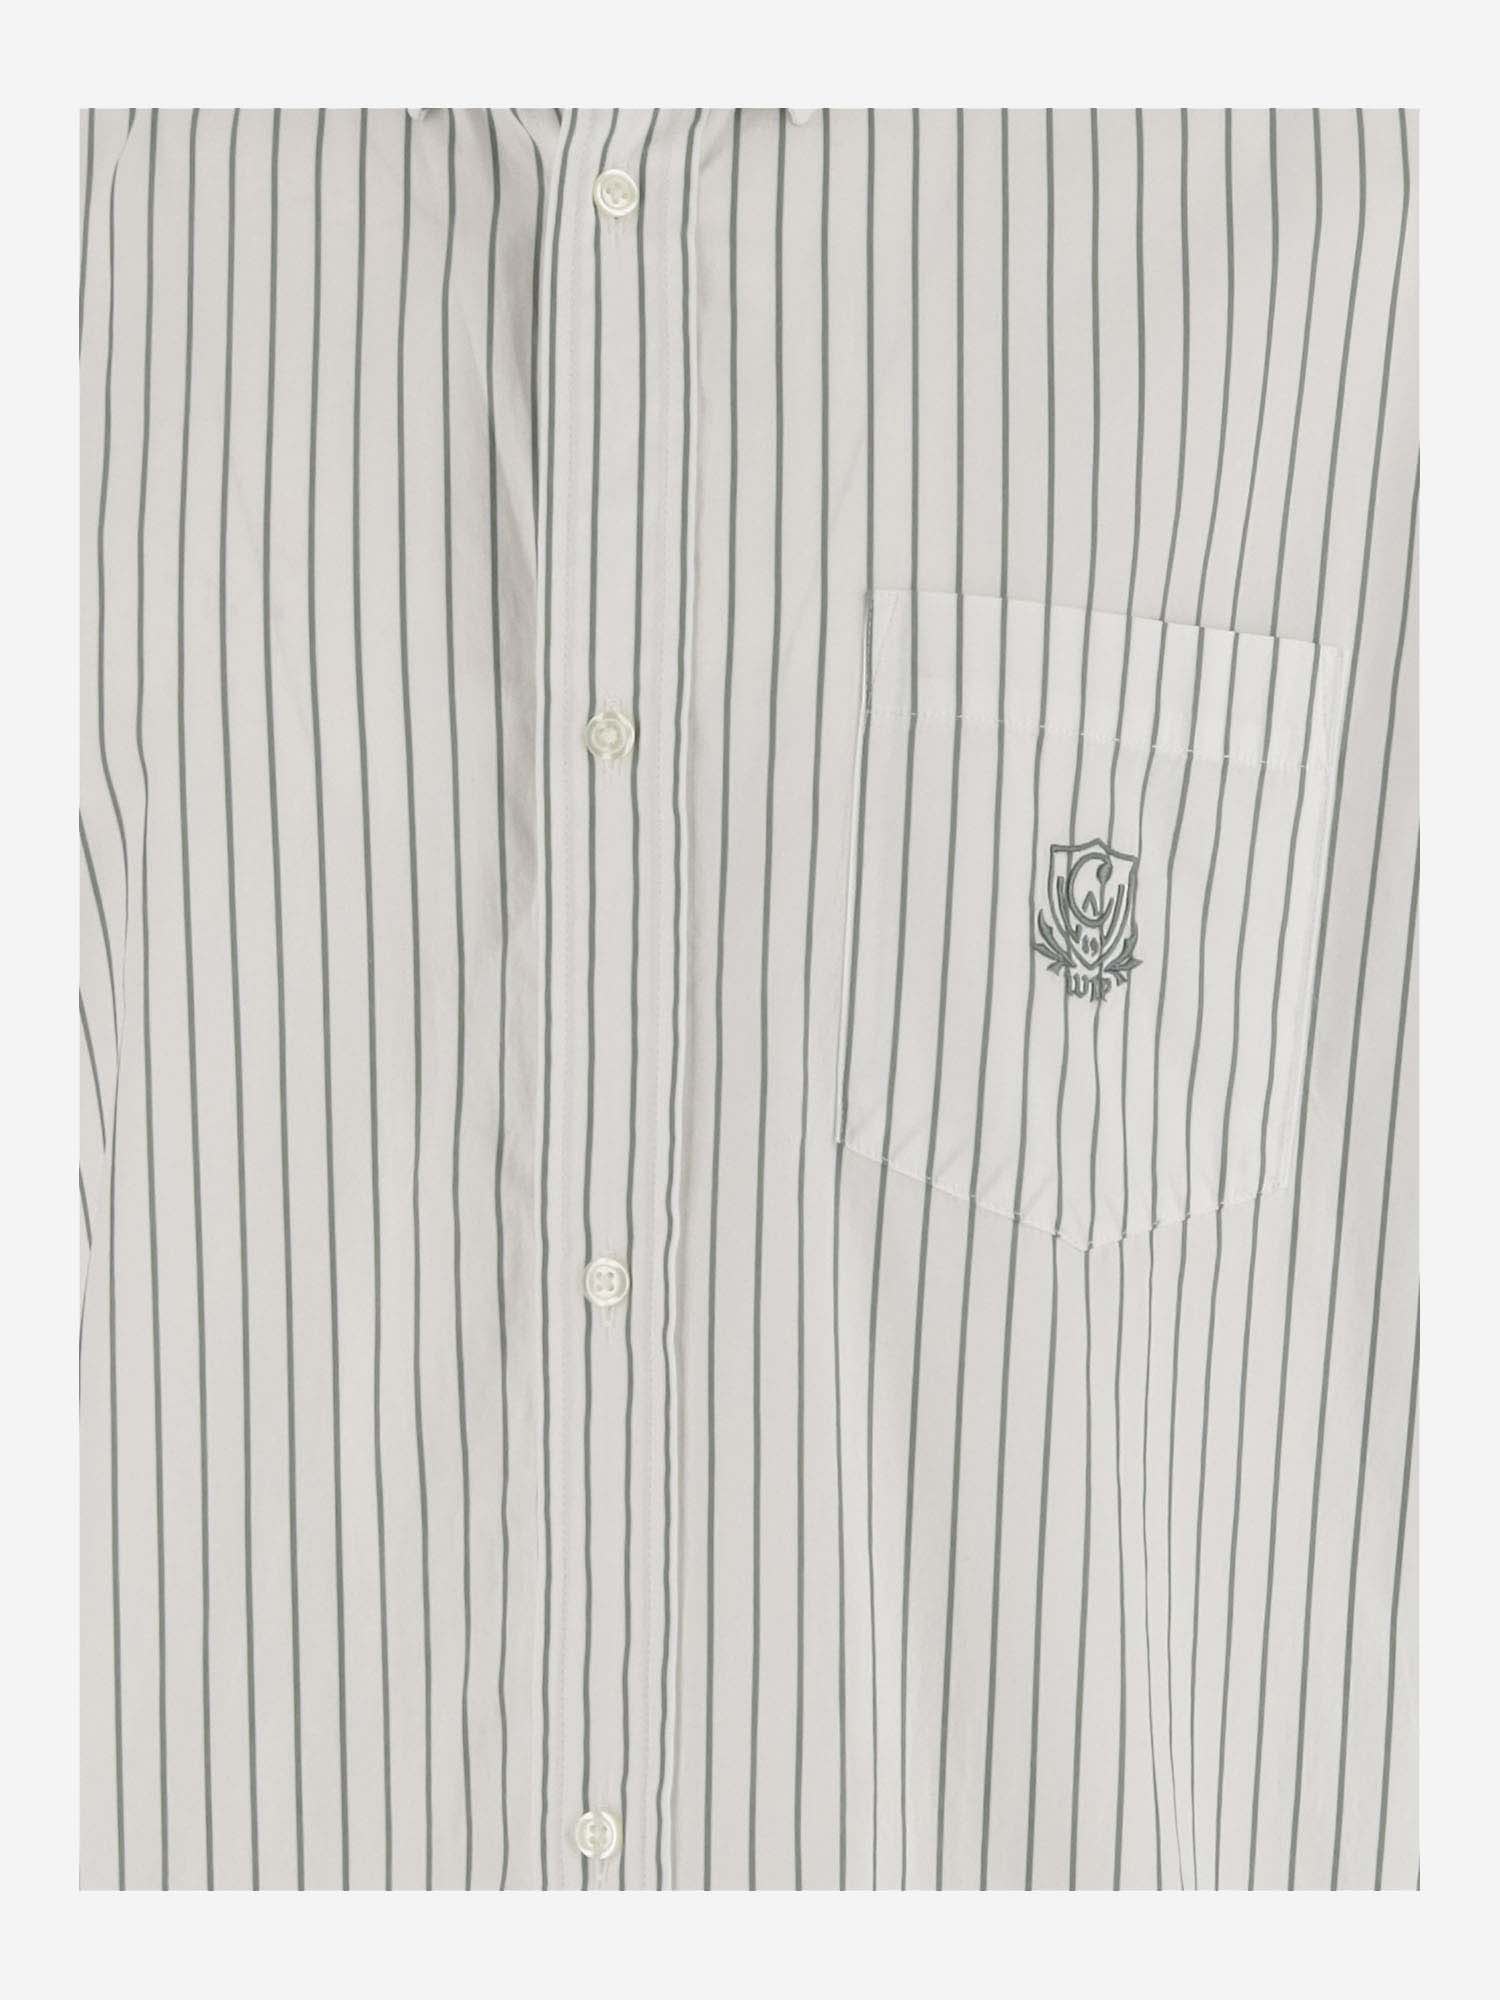 Shop Carhartt Cotton Shirt With Striped Pattern In Red